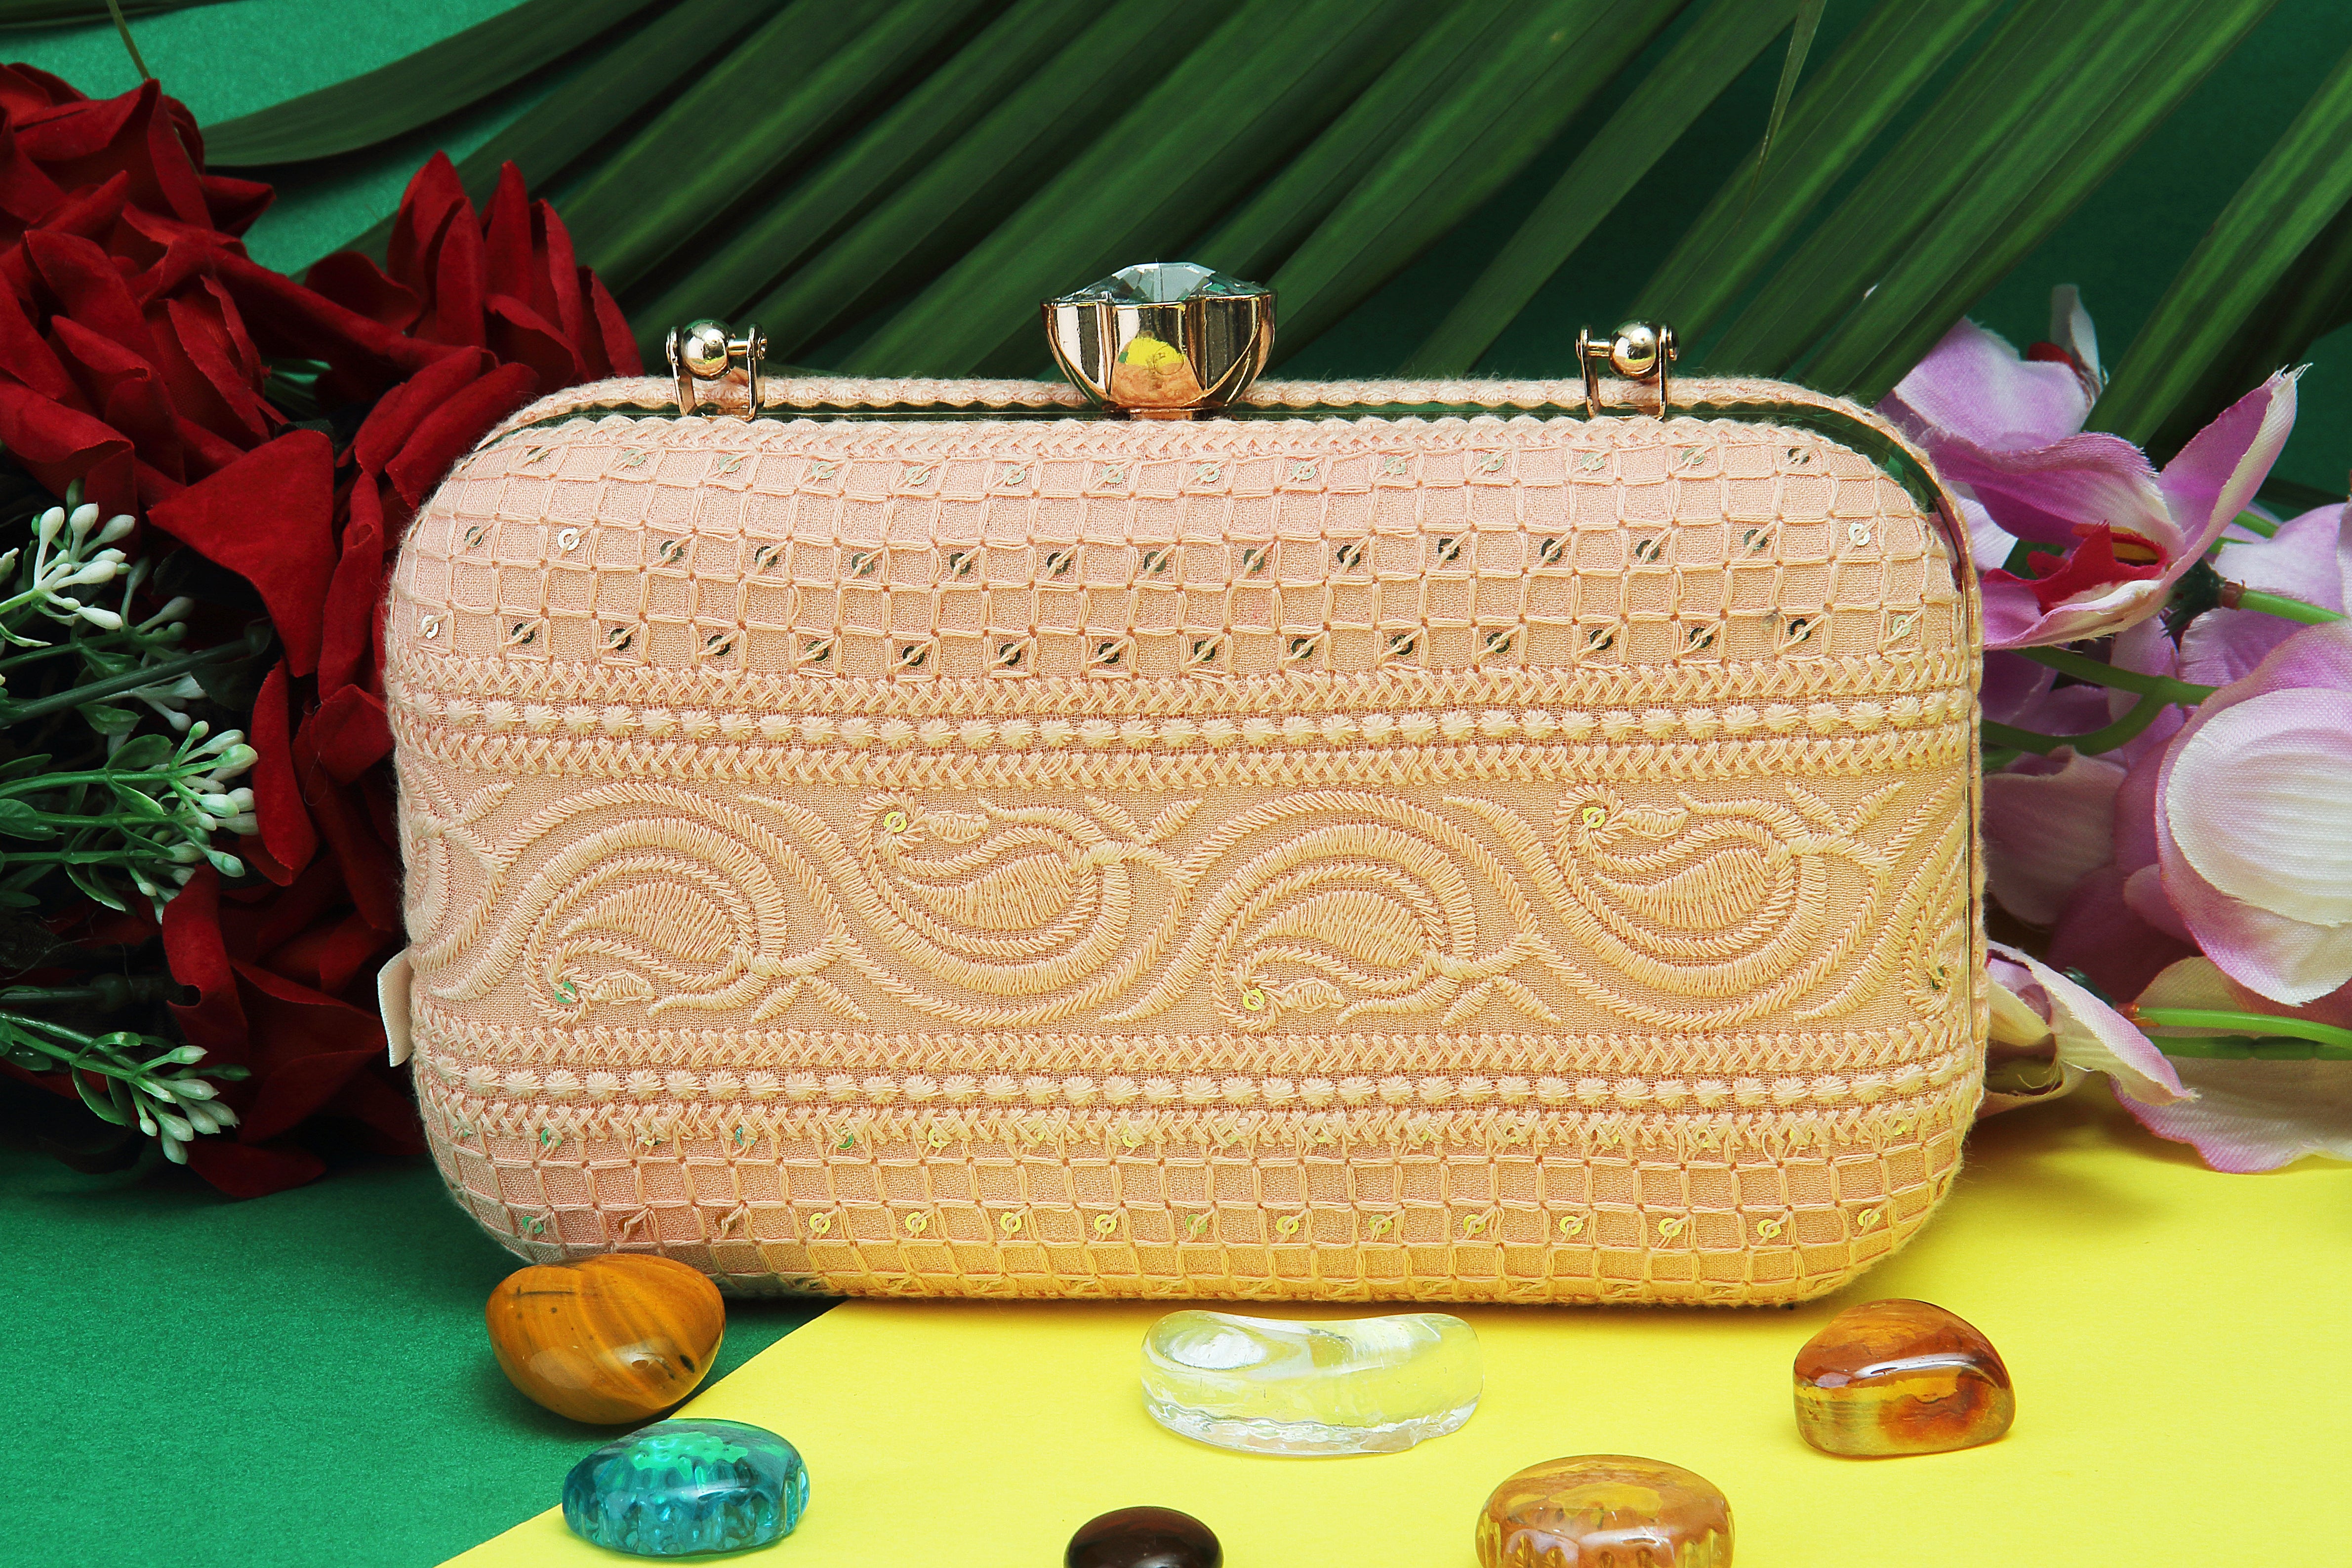 Saadgi embroidered peach designer clutch bag with sling